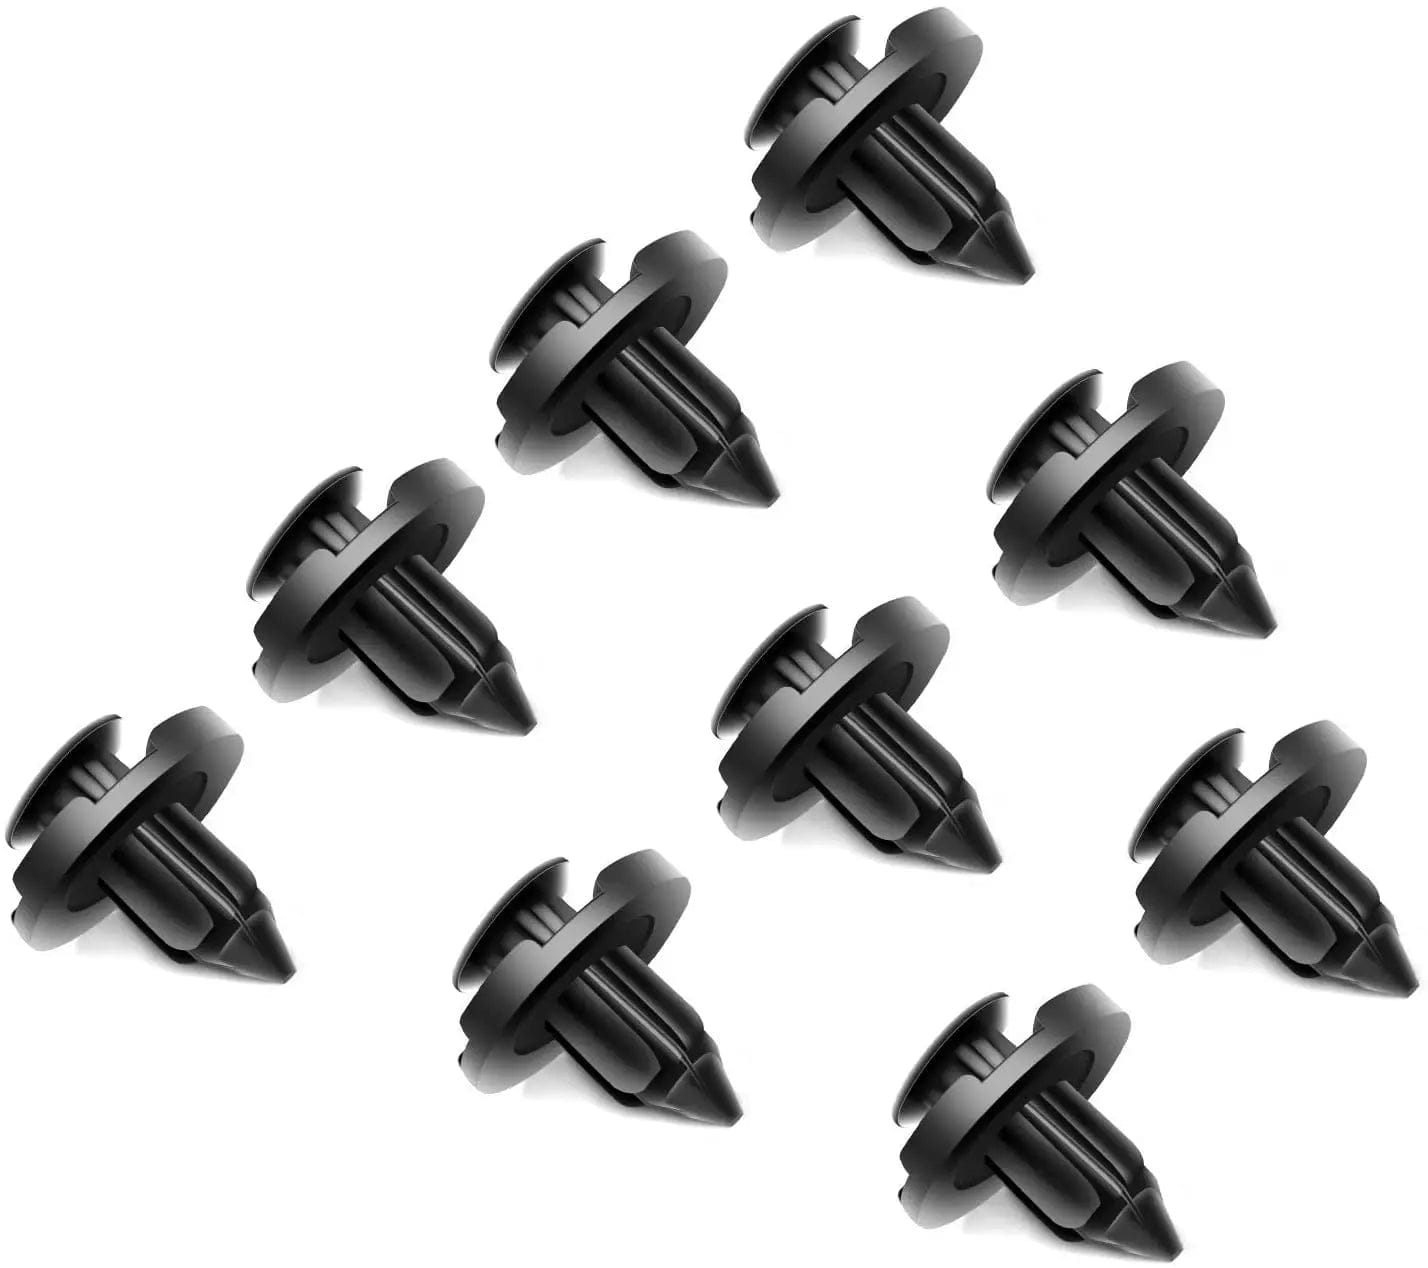 retainer clips 100 Pcs Hole 8mm Car Push Retainer Clips Kits For OEM Replacement 01553-09321